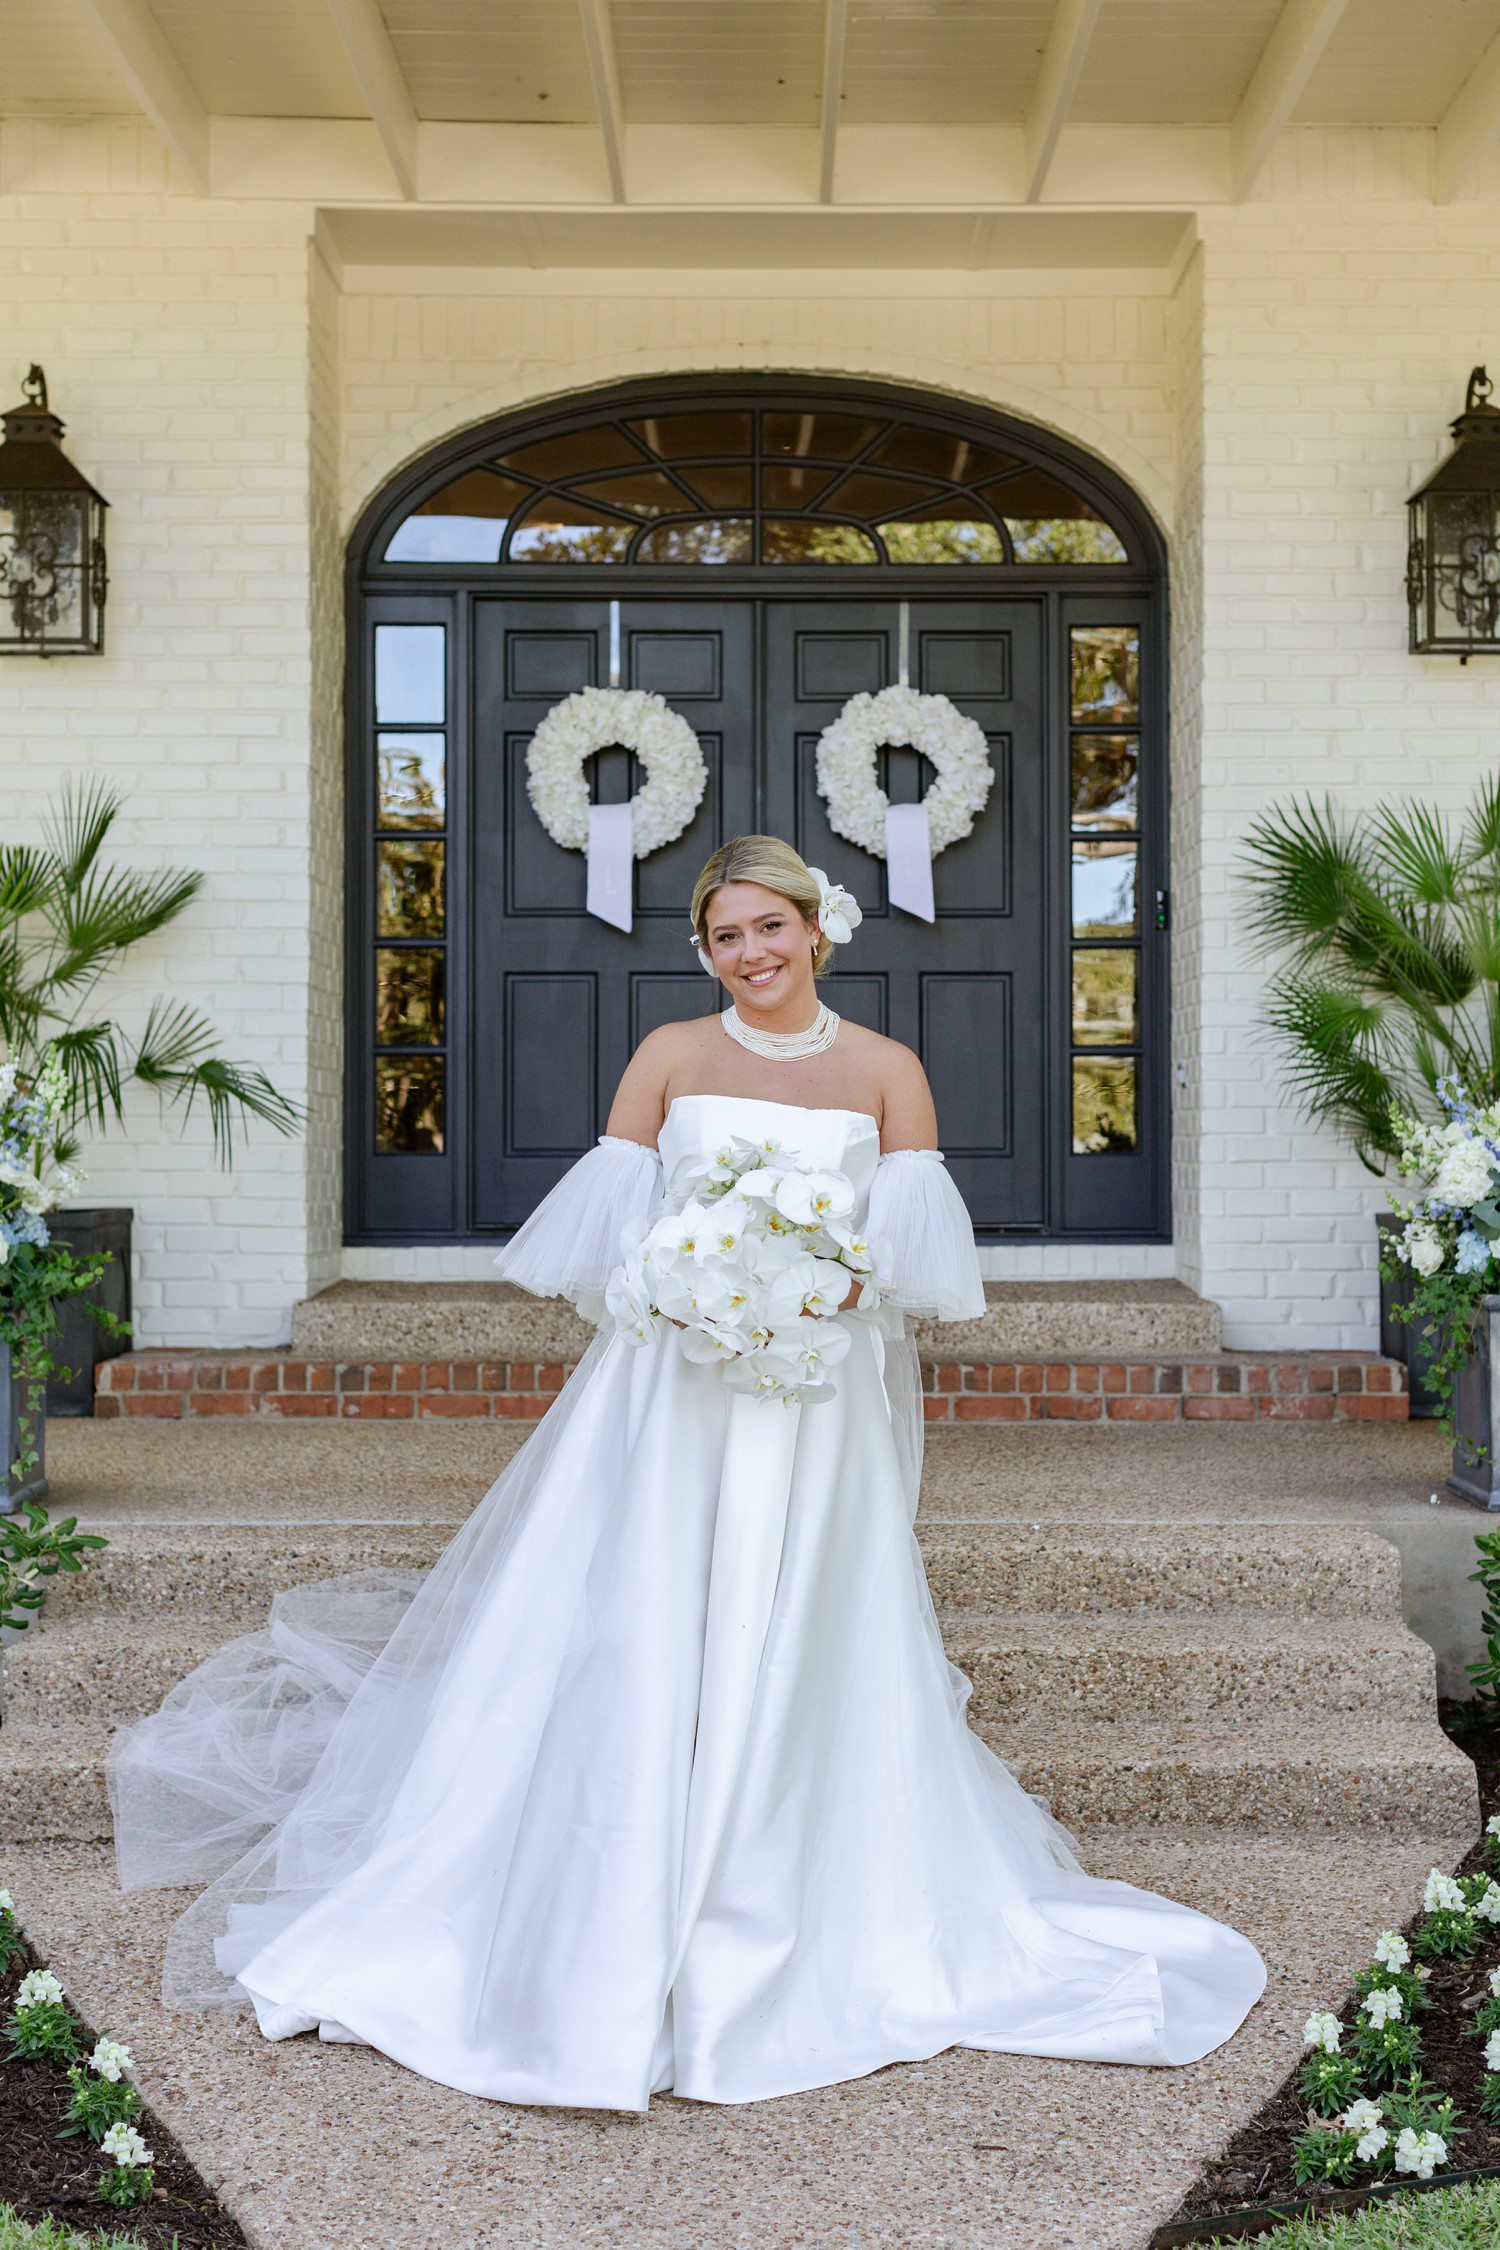 Bridal portraits with white orchid bouquet.